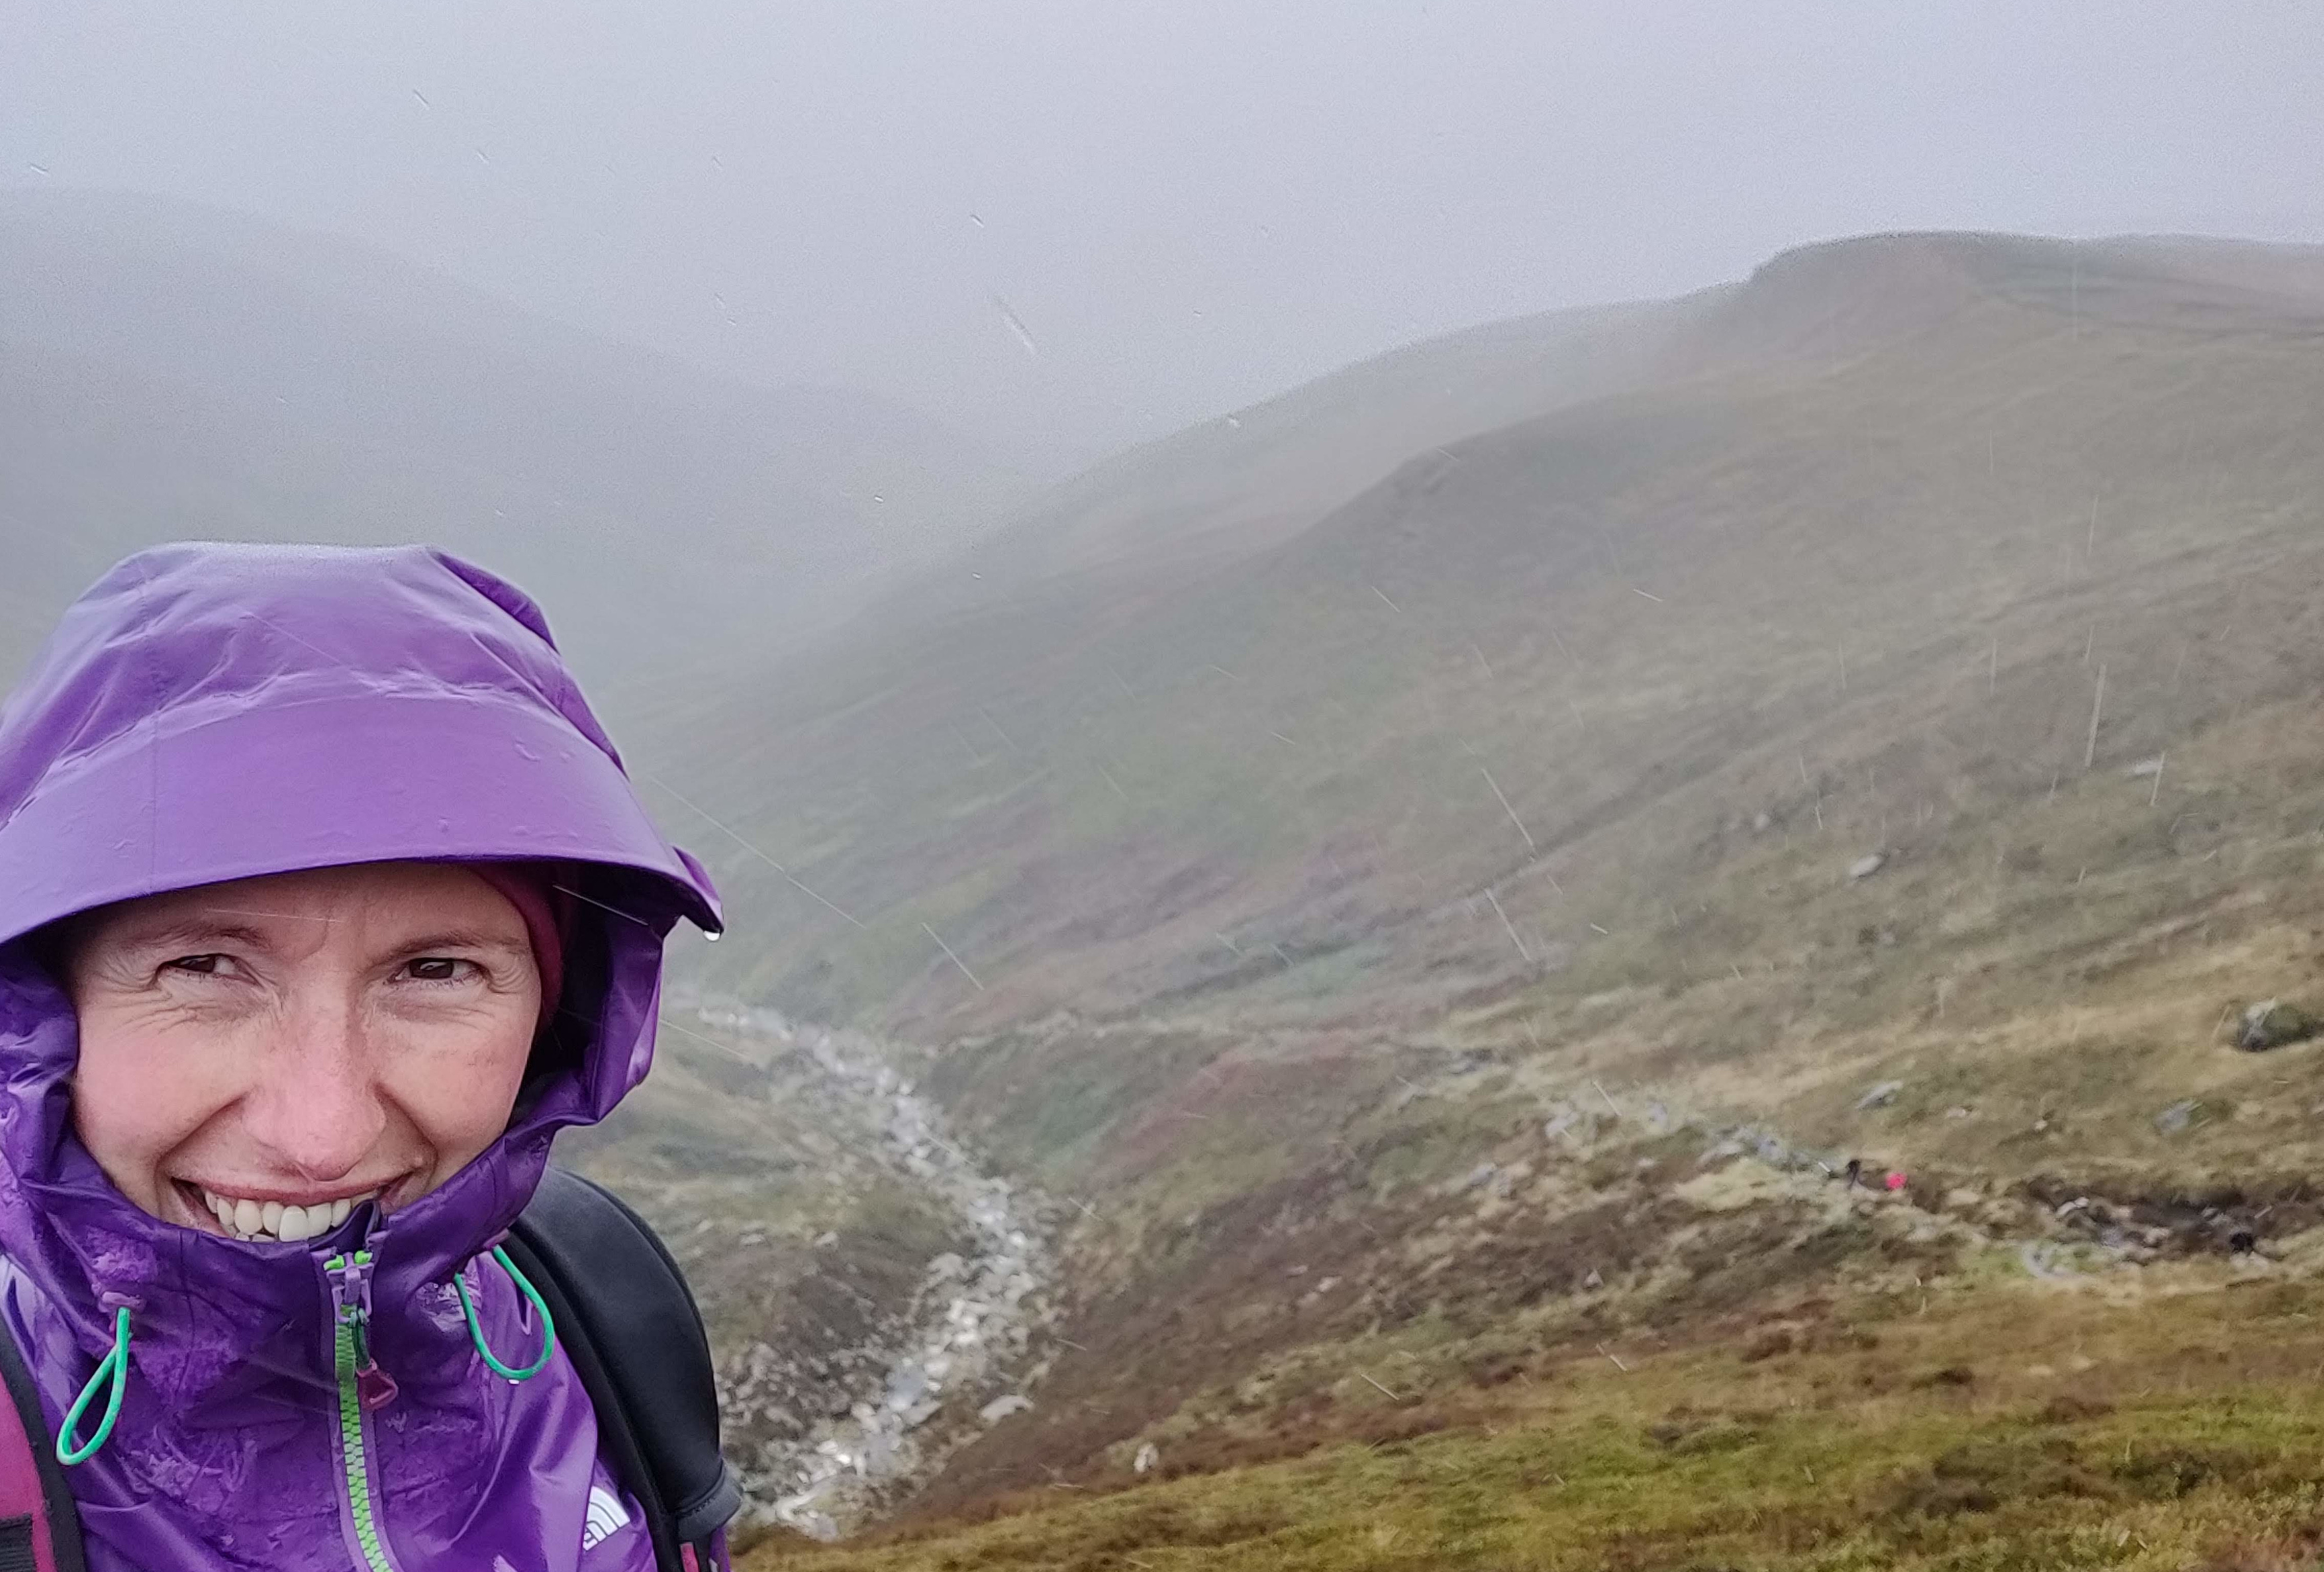 Rainy day up Crowden Clough